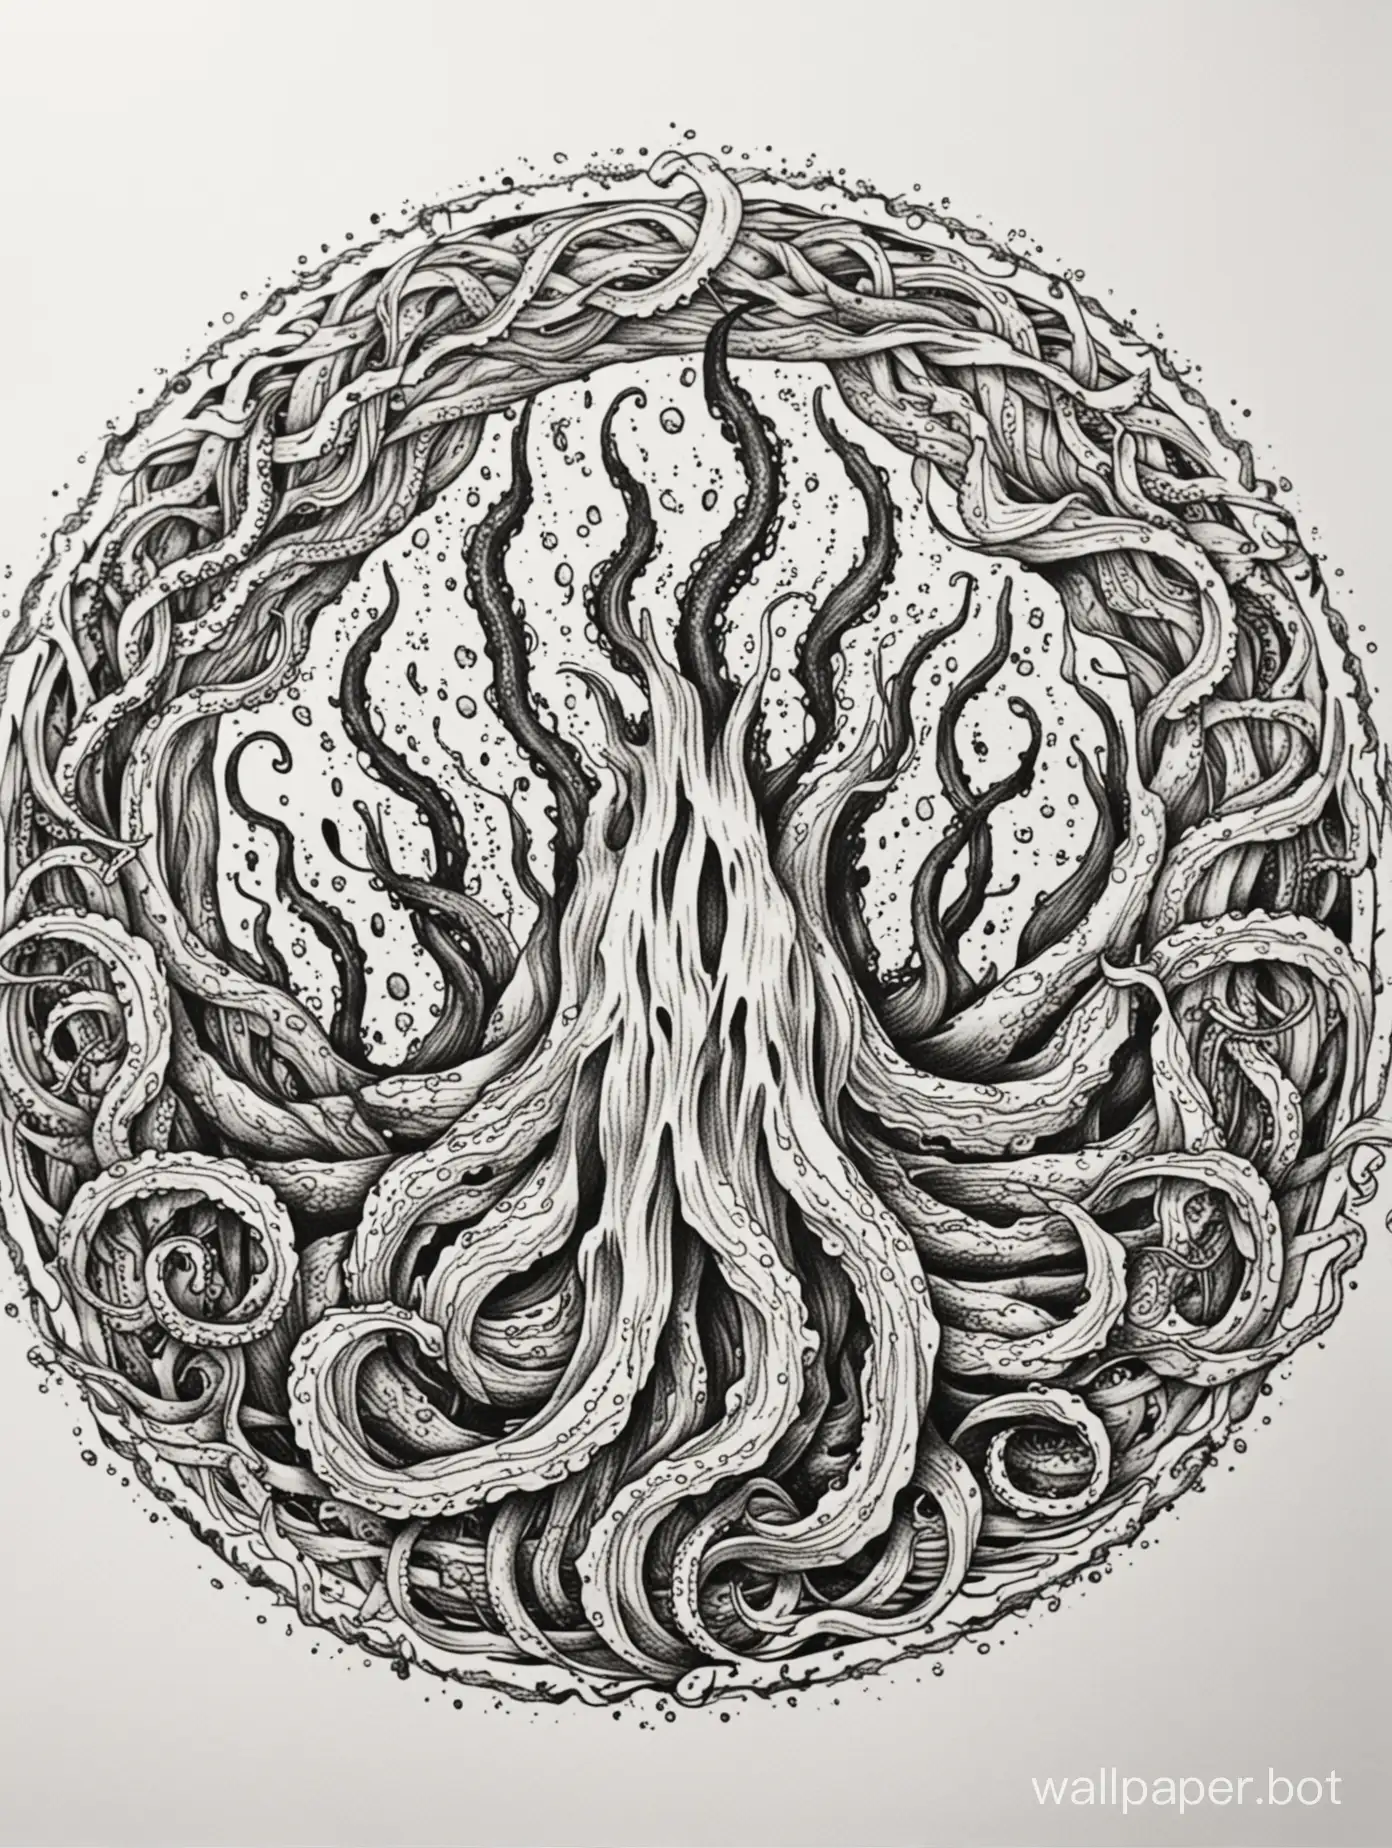 Monochromatic-Blackwork-Hand-Tattoo-Design-with-Tentacles-and-Veins